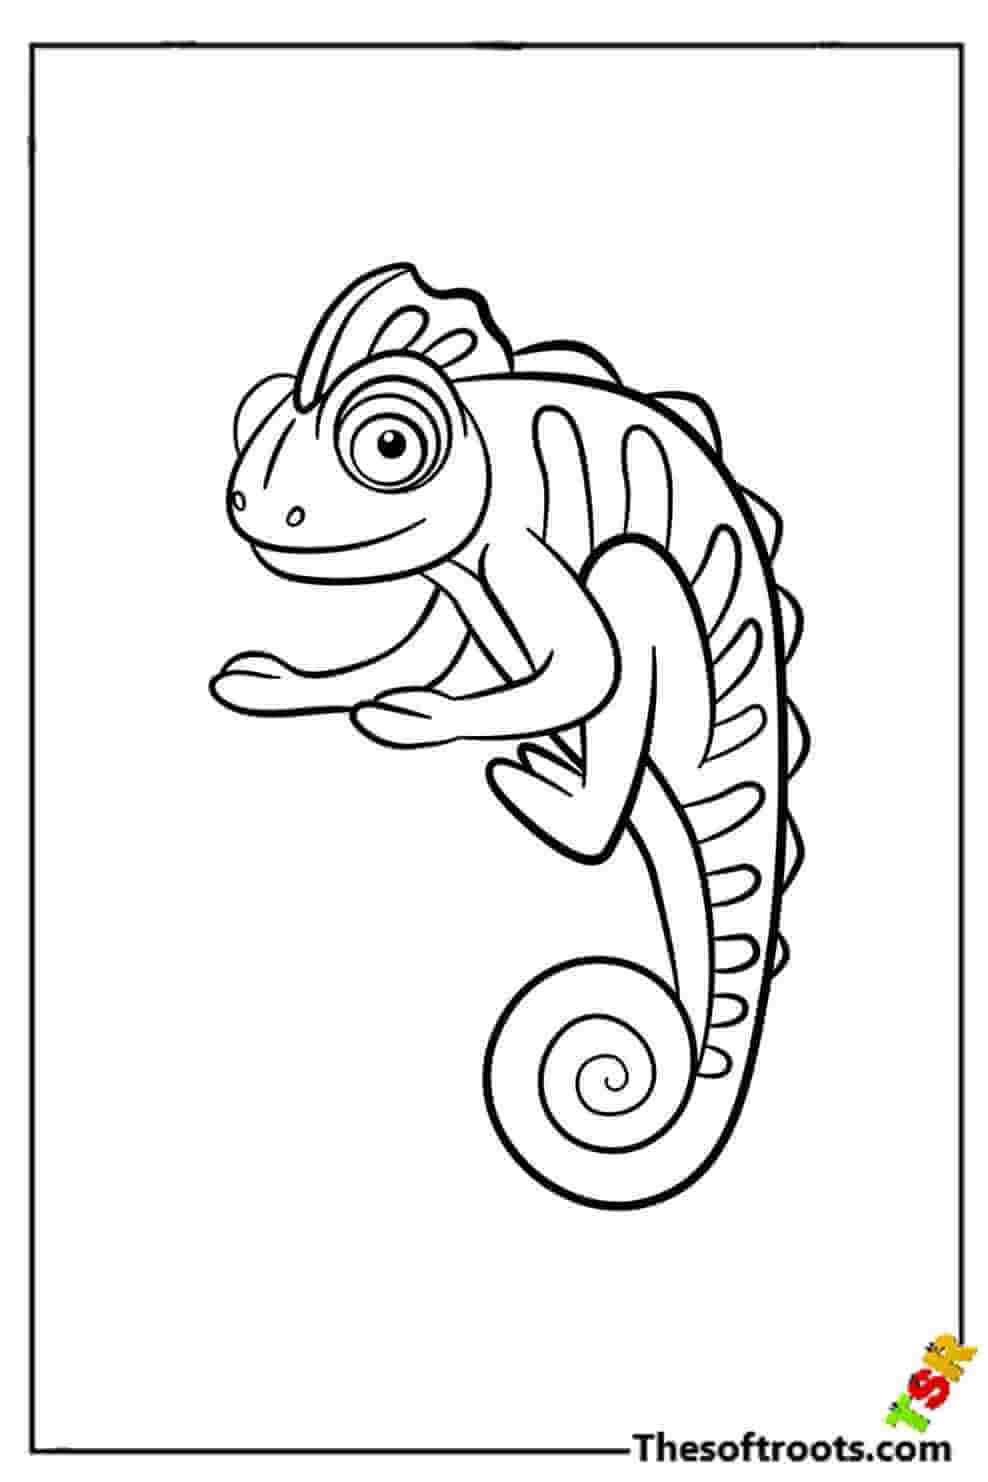 Chameleon lizard coloring pages